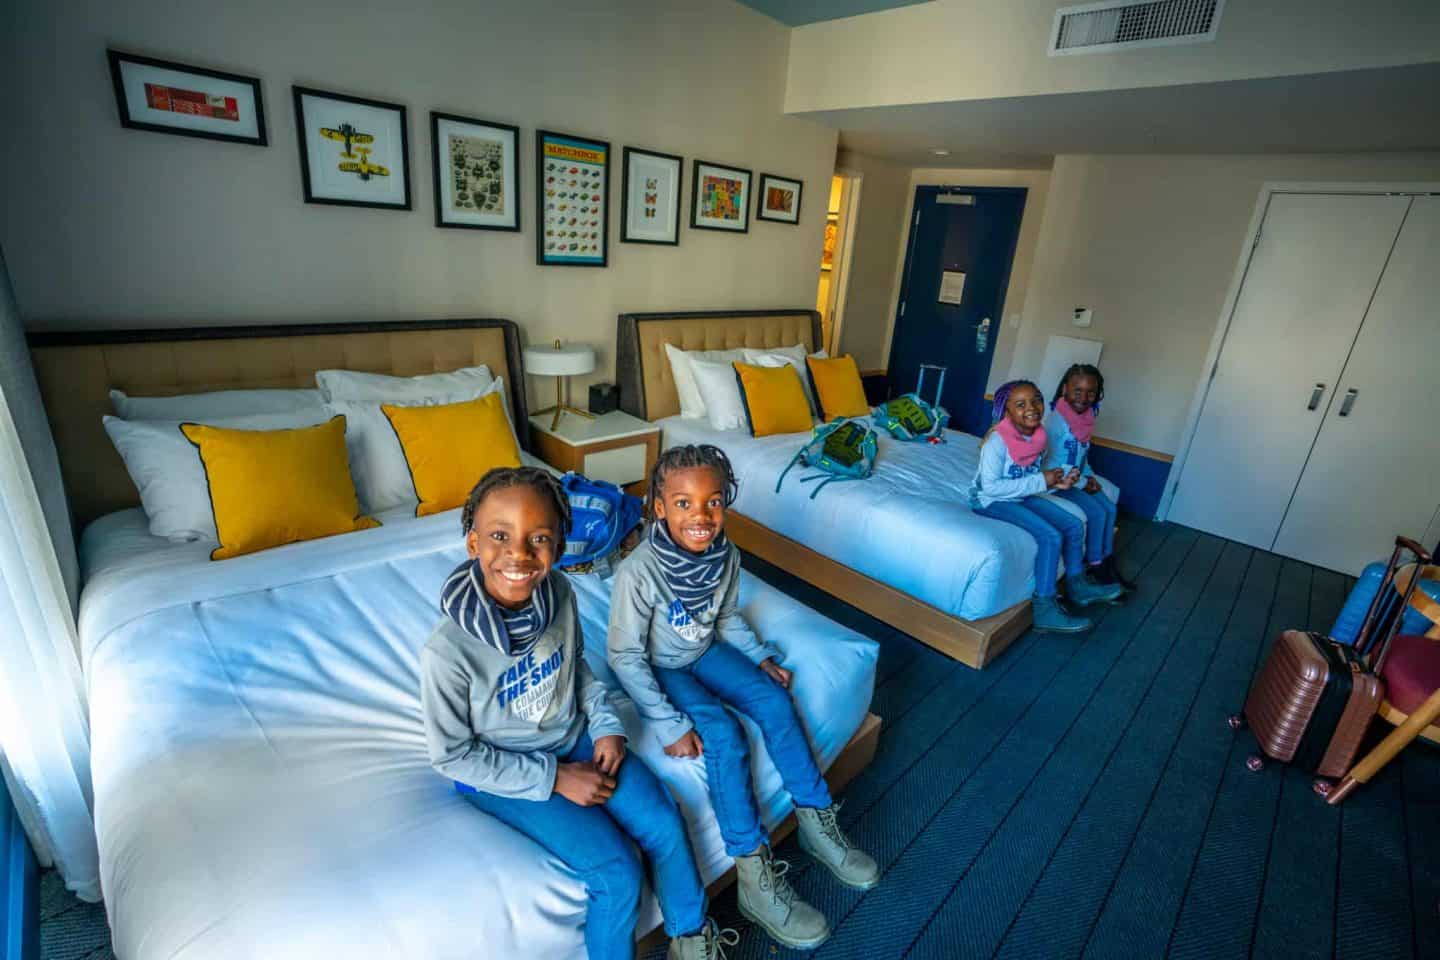 Where to Stay in Cleveland With Kids